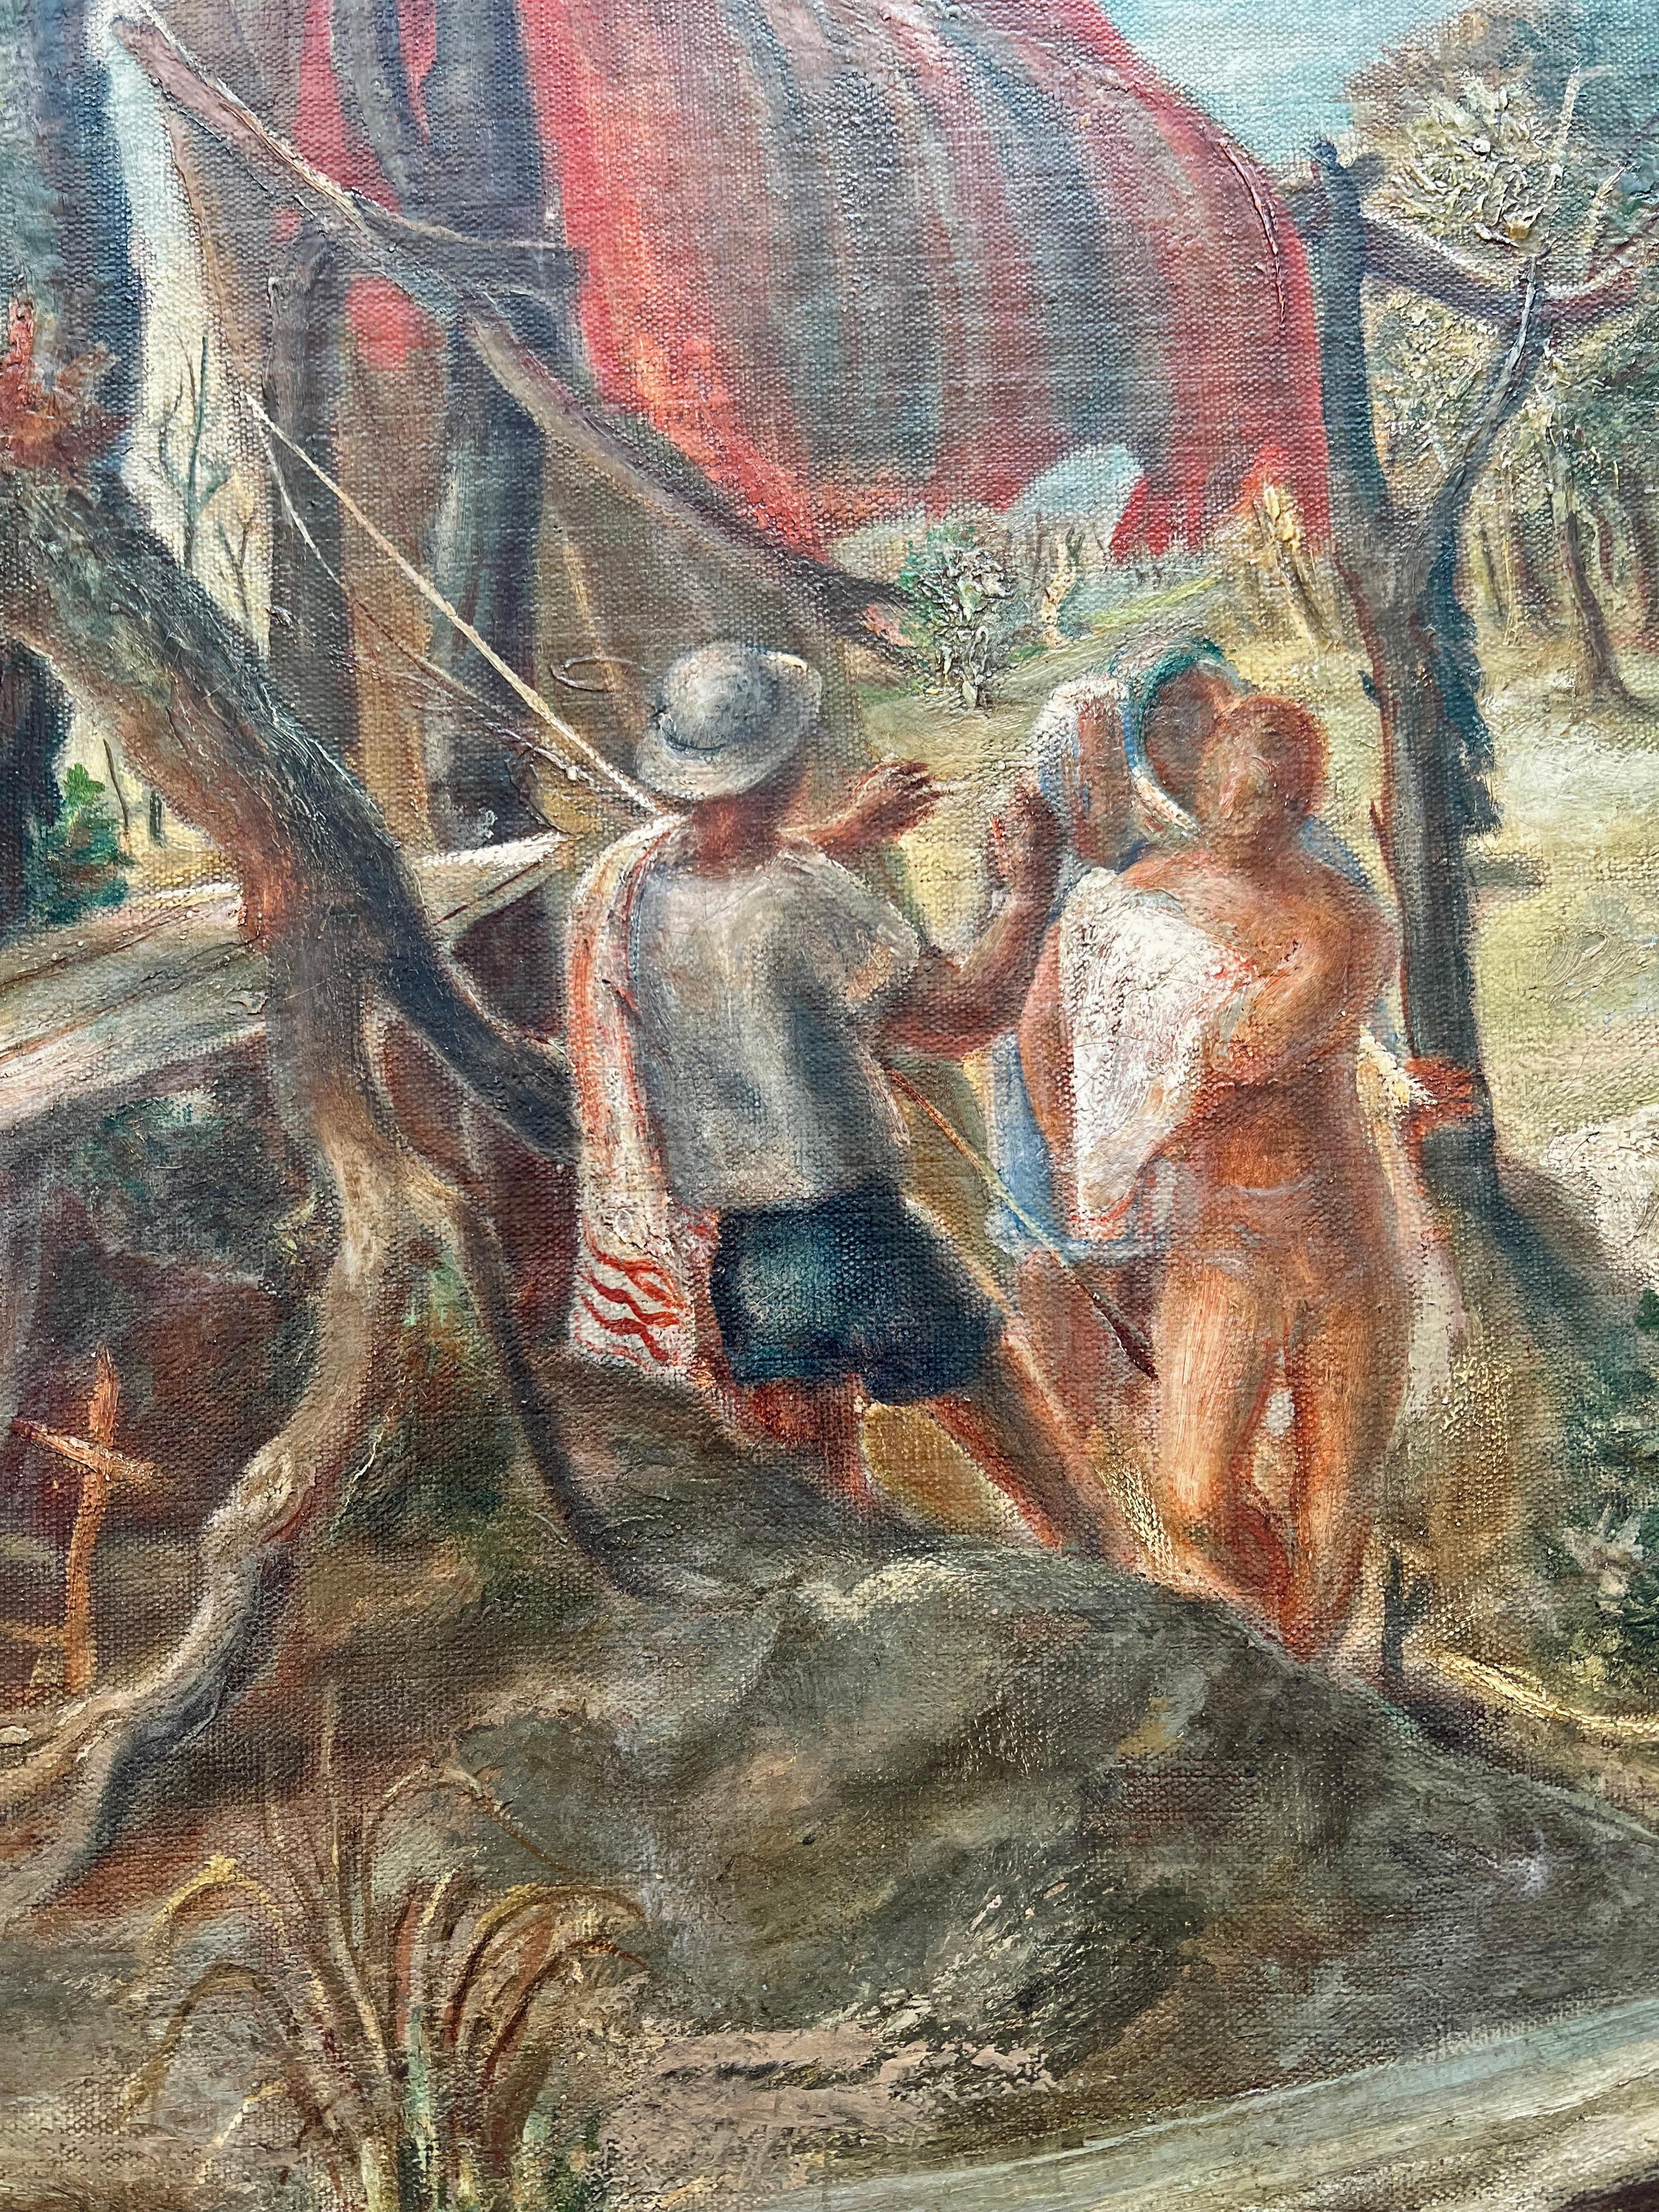 This painting is illustrated in the Catalogue of the 1945 Encyclopedia Britannica Collection of Contemporary American Painting, p.84. Written and edited by Grace Pagano. 

